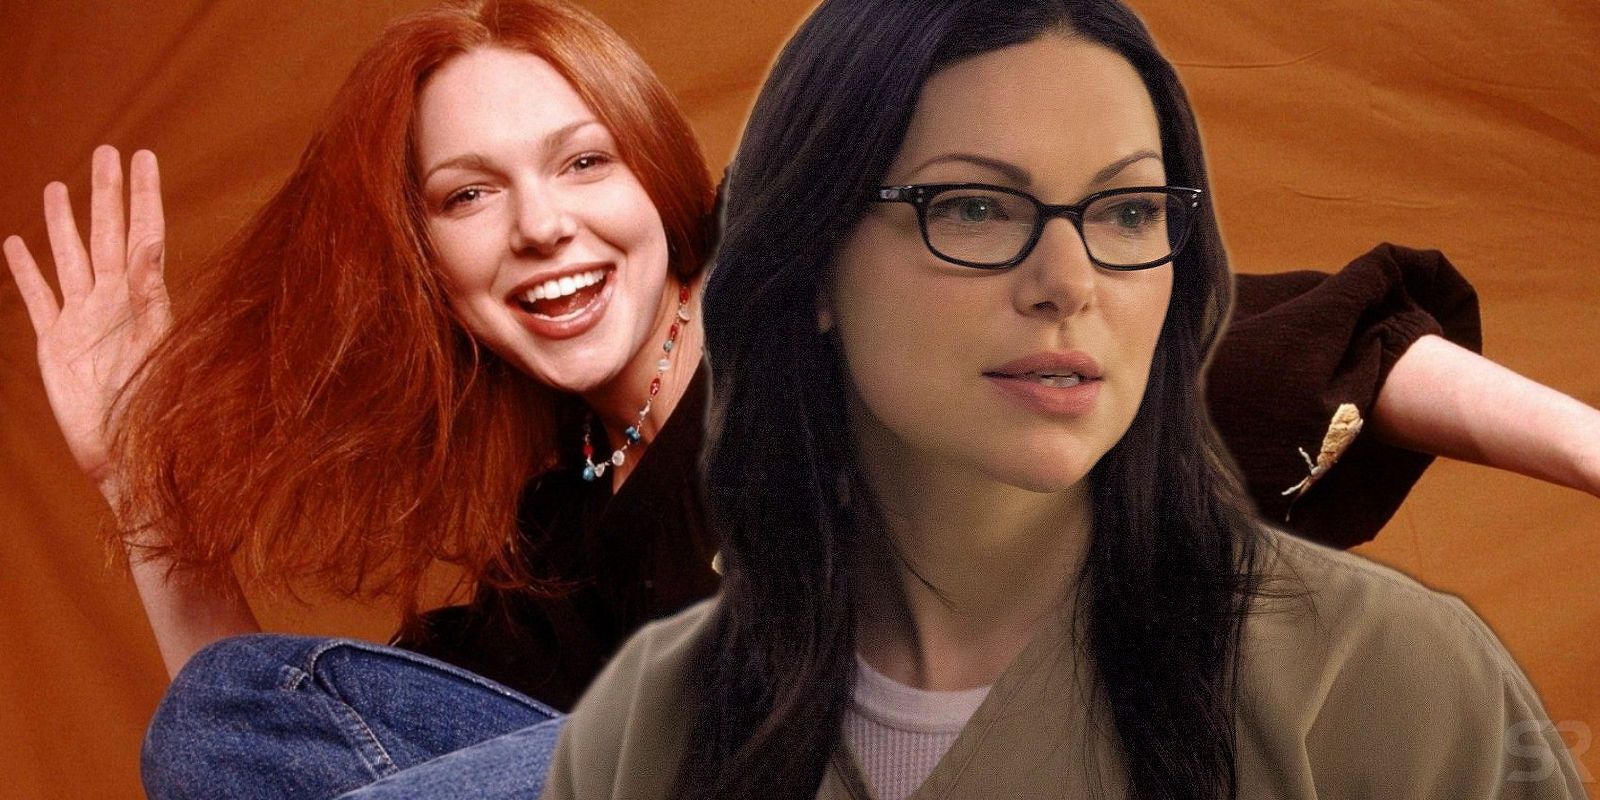 That ‘70s Show Hilariously Predicted Laura Prepon’s Future On OITNB